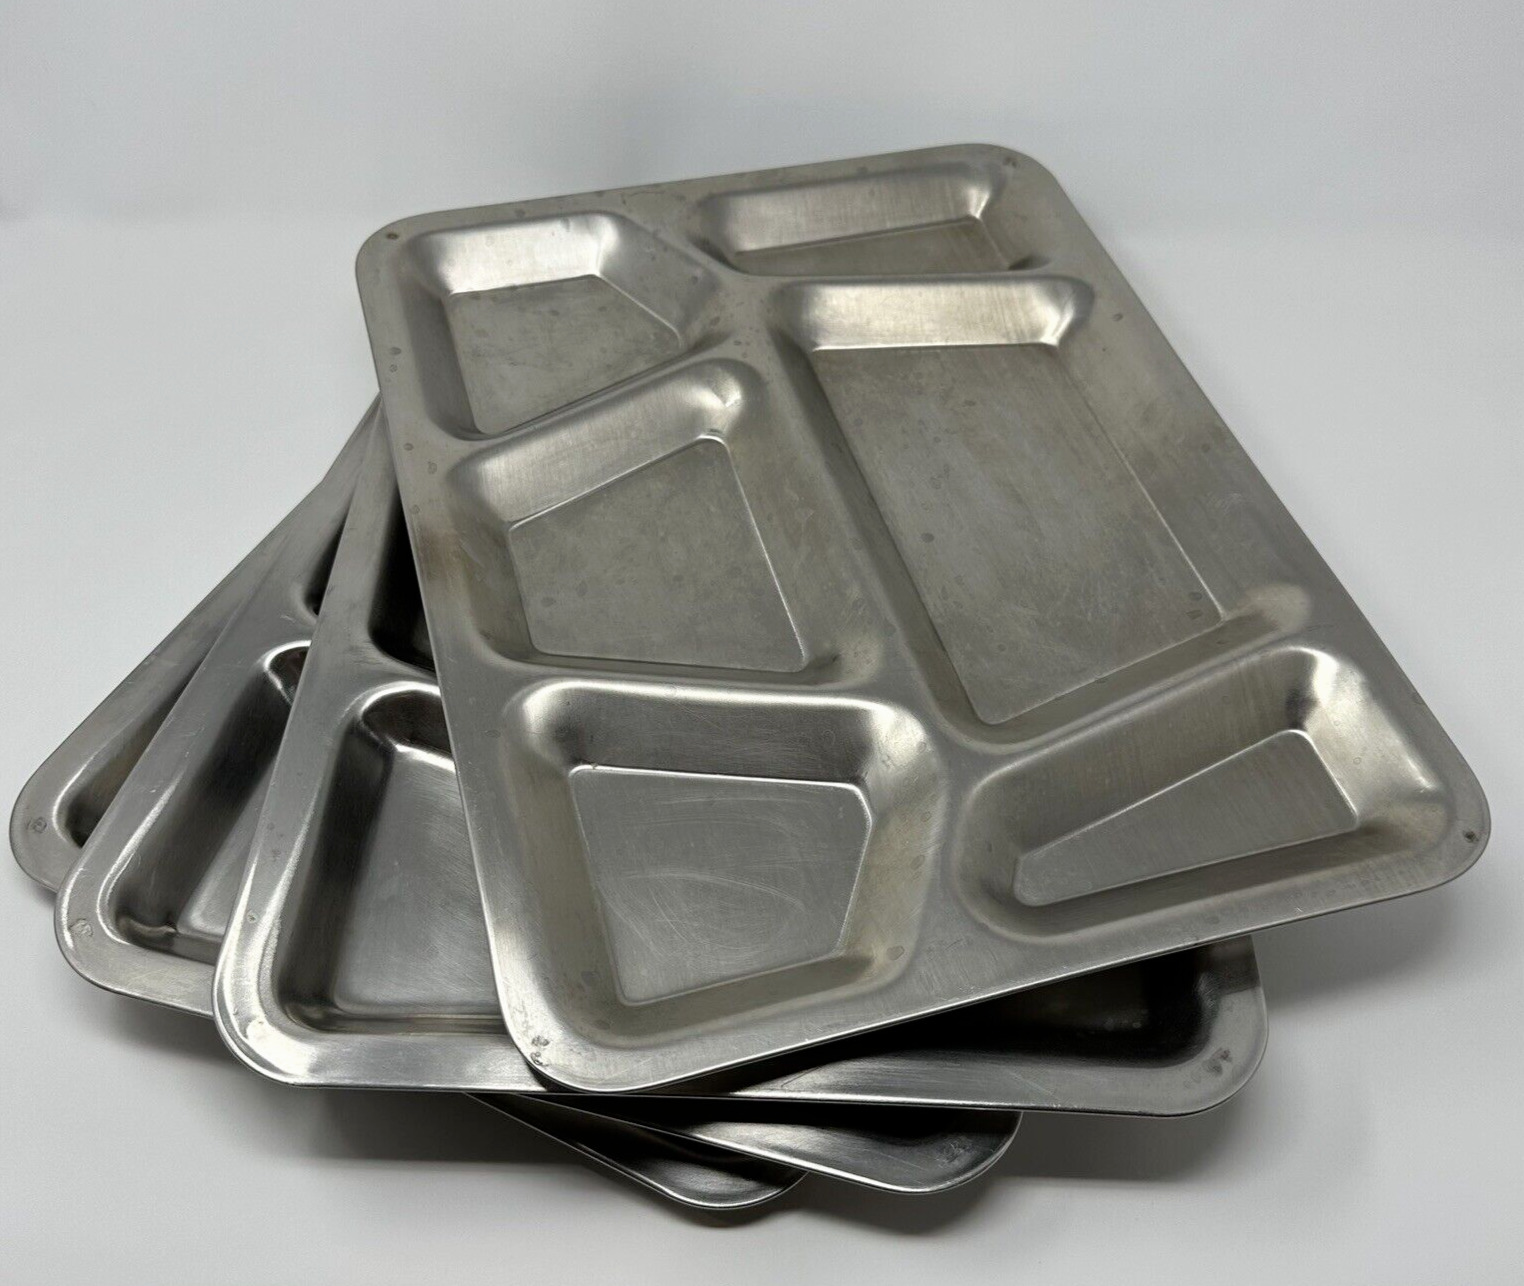 4 USN Military Metal Divided Trays Cafeteria Stainless Steel 6 Compartments Used